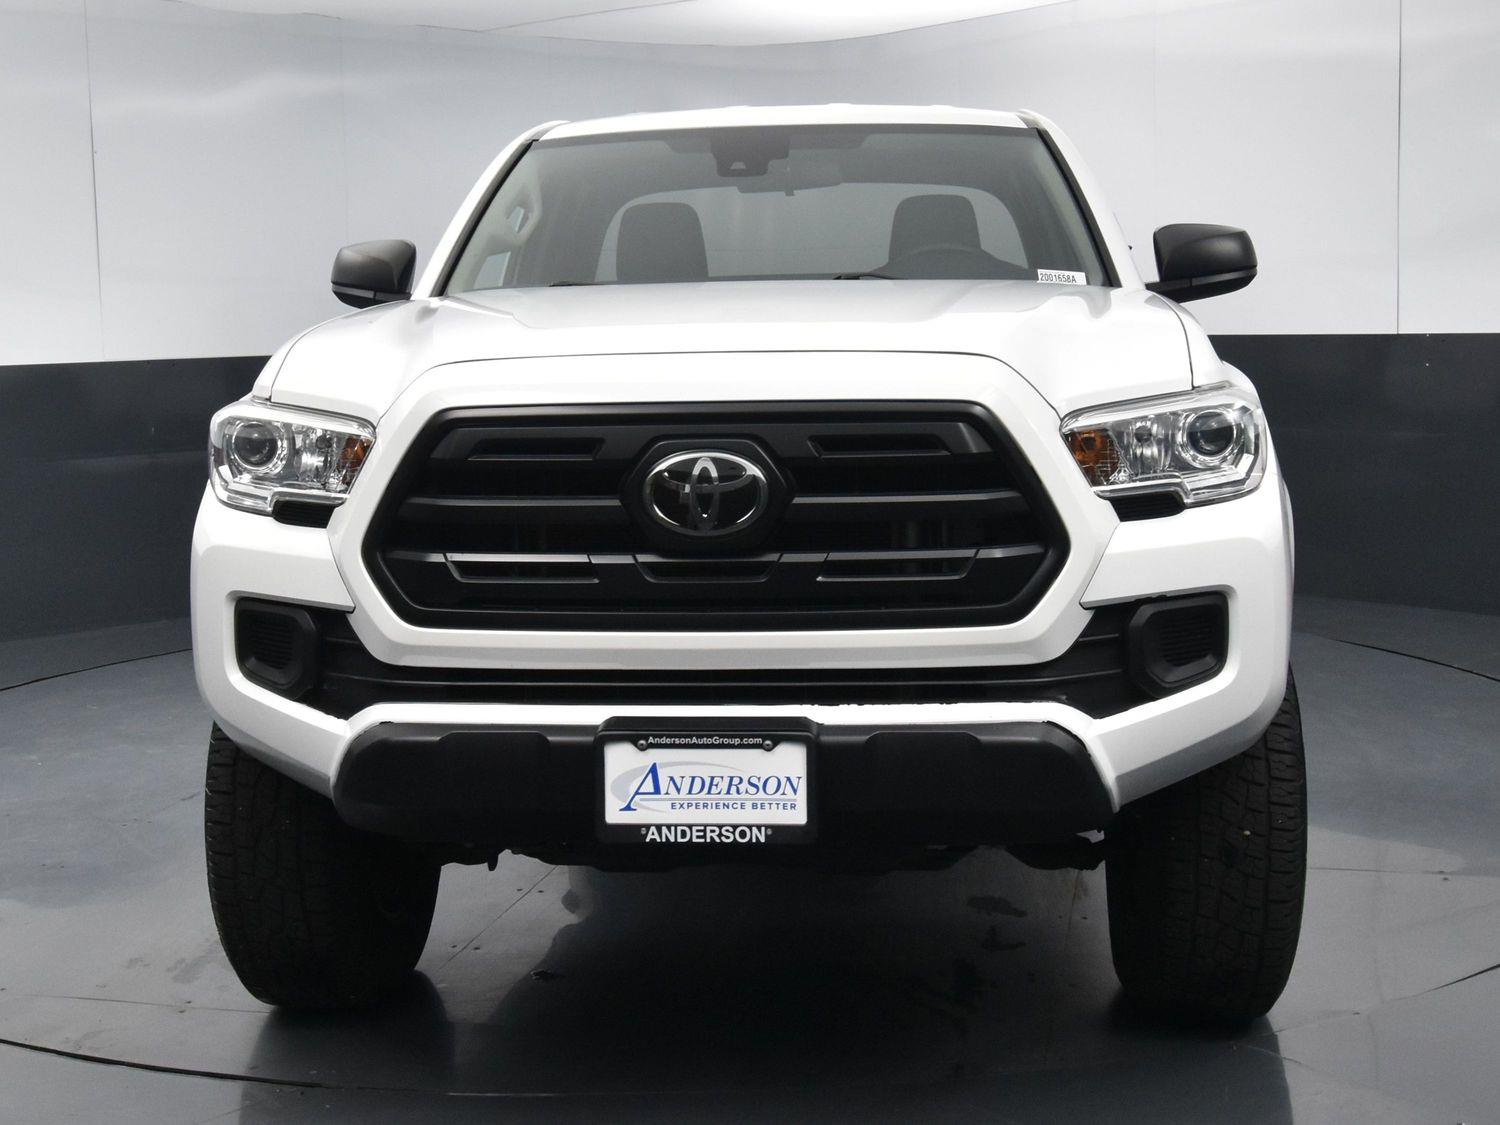 Used 2019 Toyota Tacoma 4WD SR Extended Cab Truck for sale in Grand Island NE